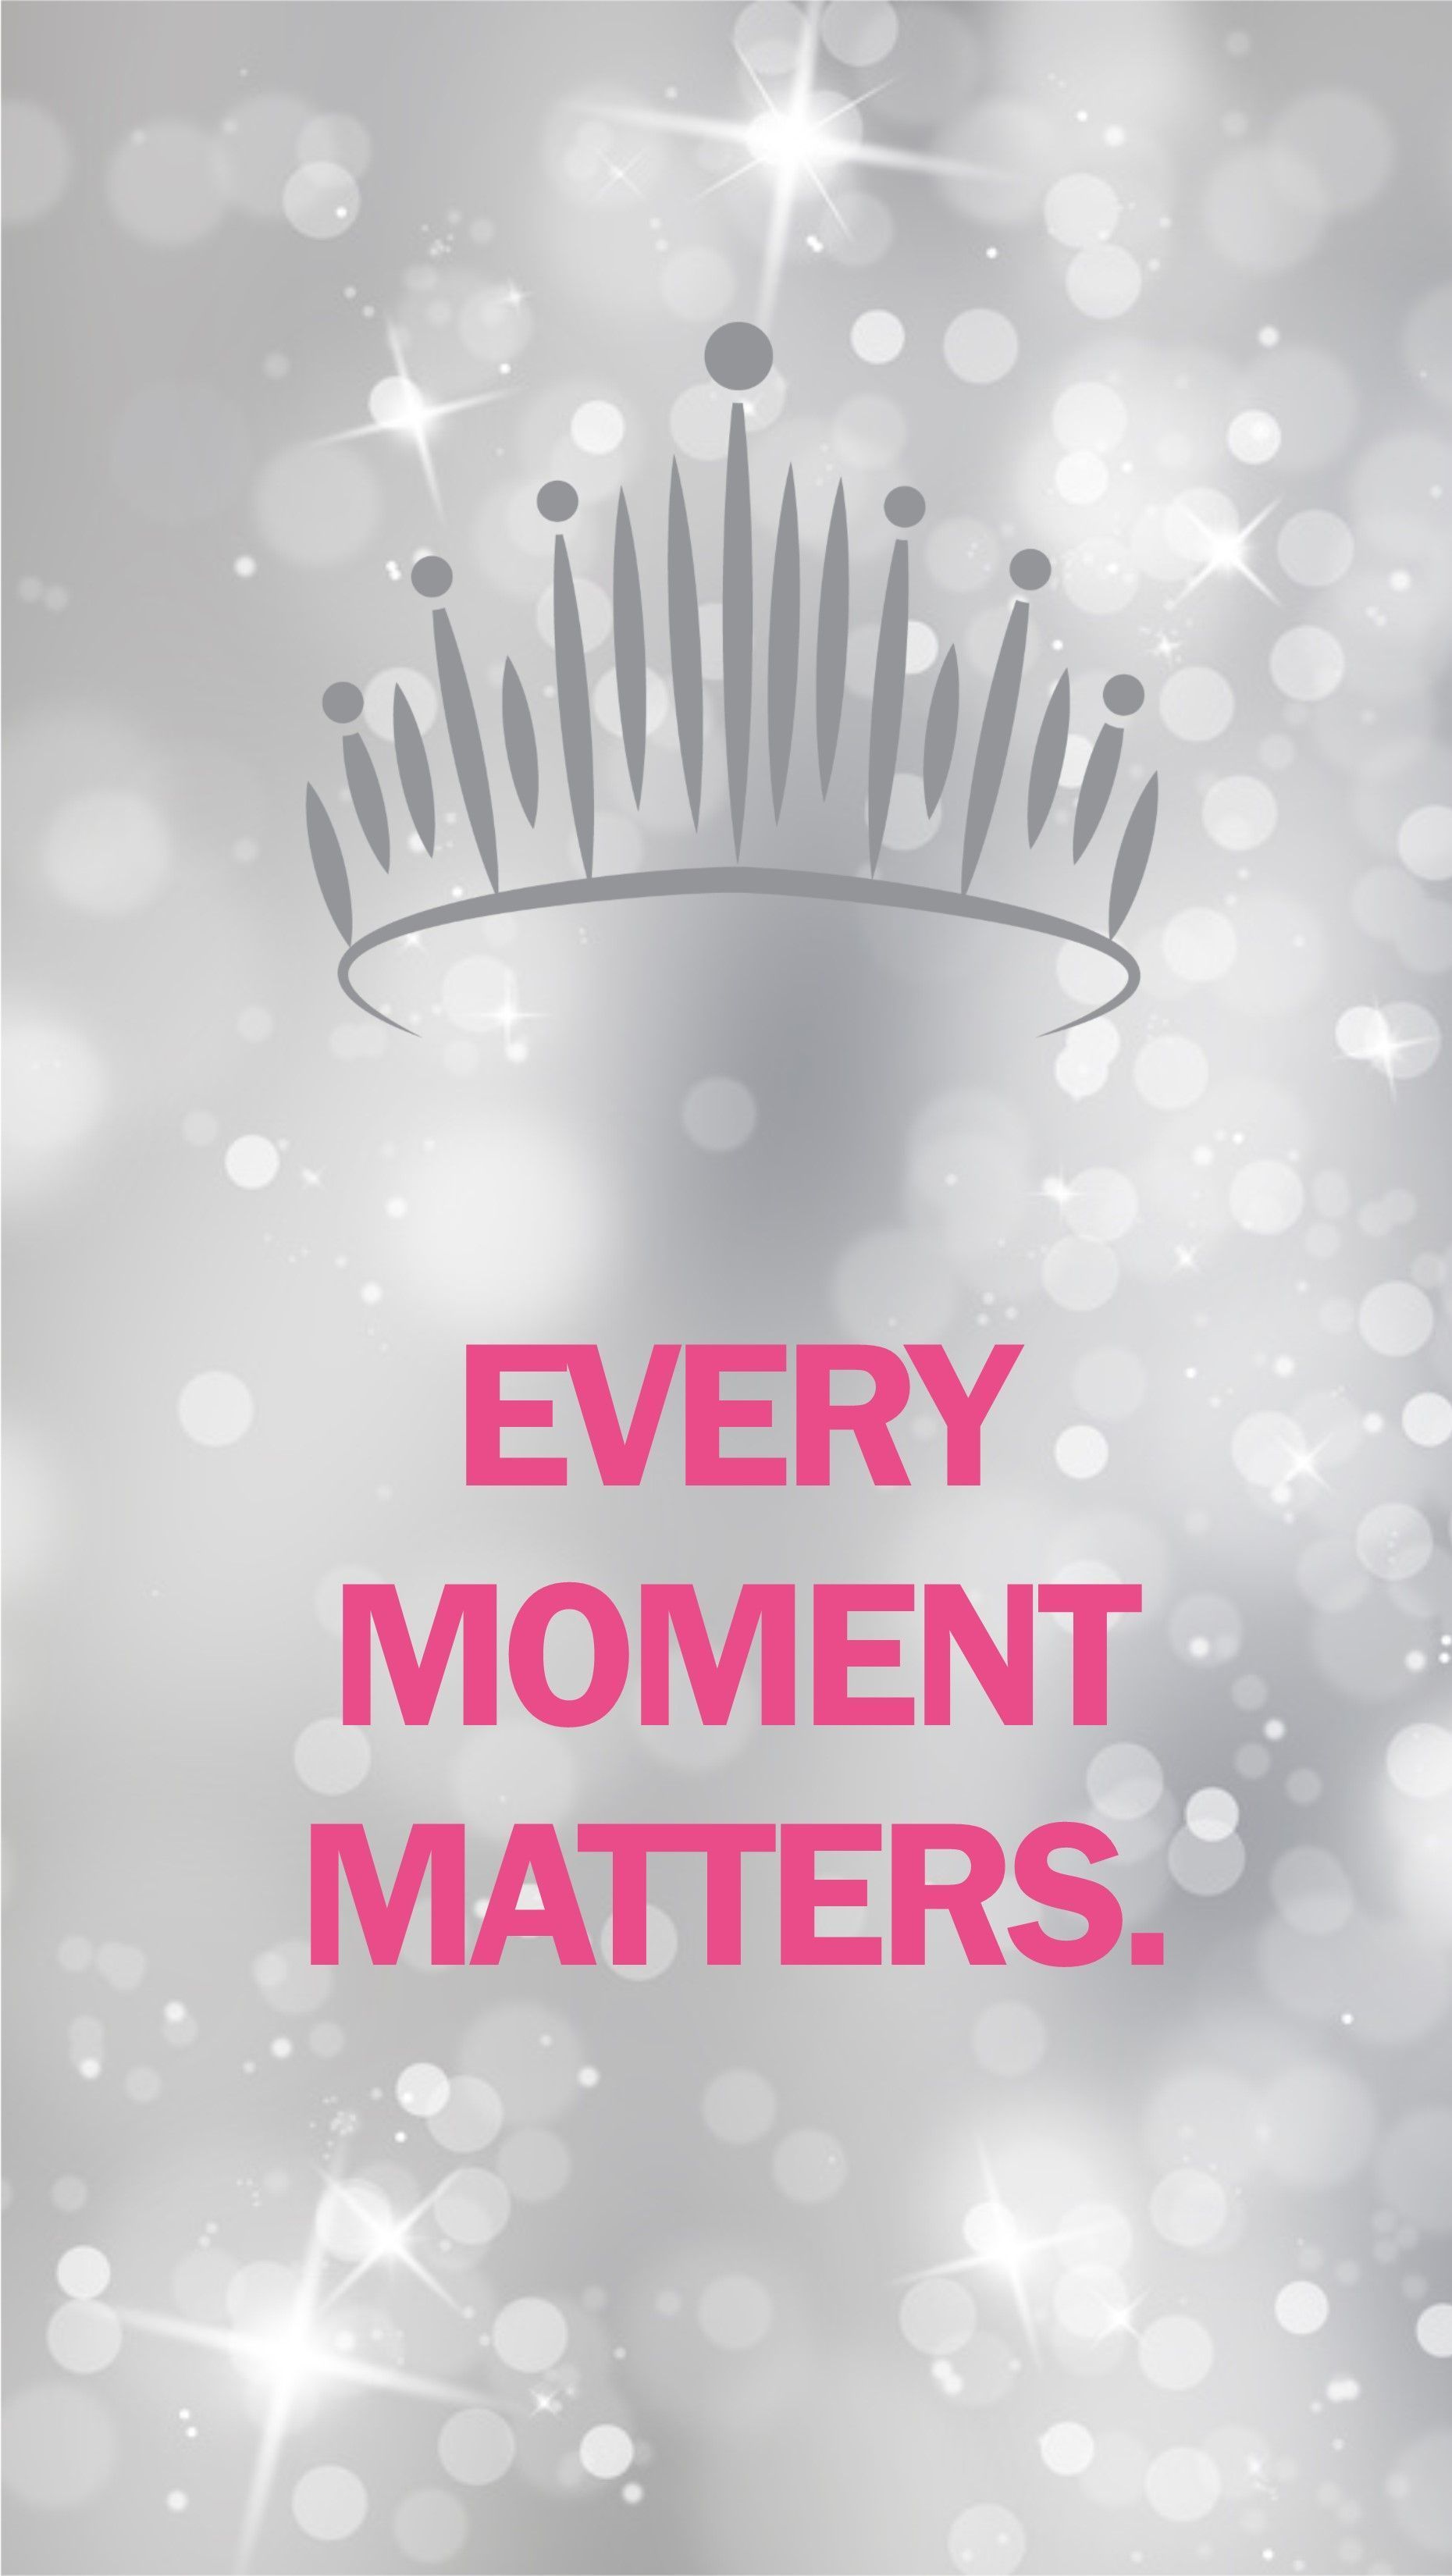 Pageant Planet phone wallpaper background silver and pink sparkle with crown #pageant #beautypagea. Phone wallpaper quotes, Wallpaper quotes, Inspirational quotes